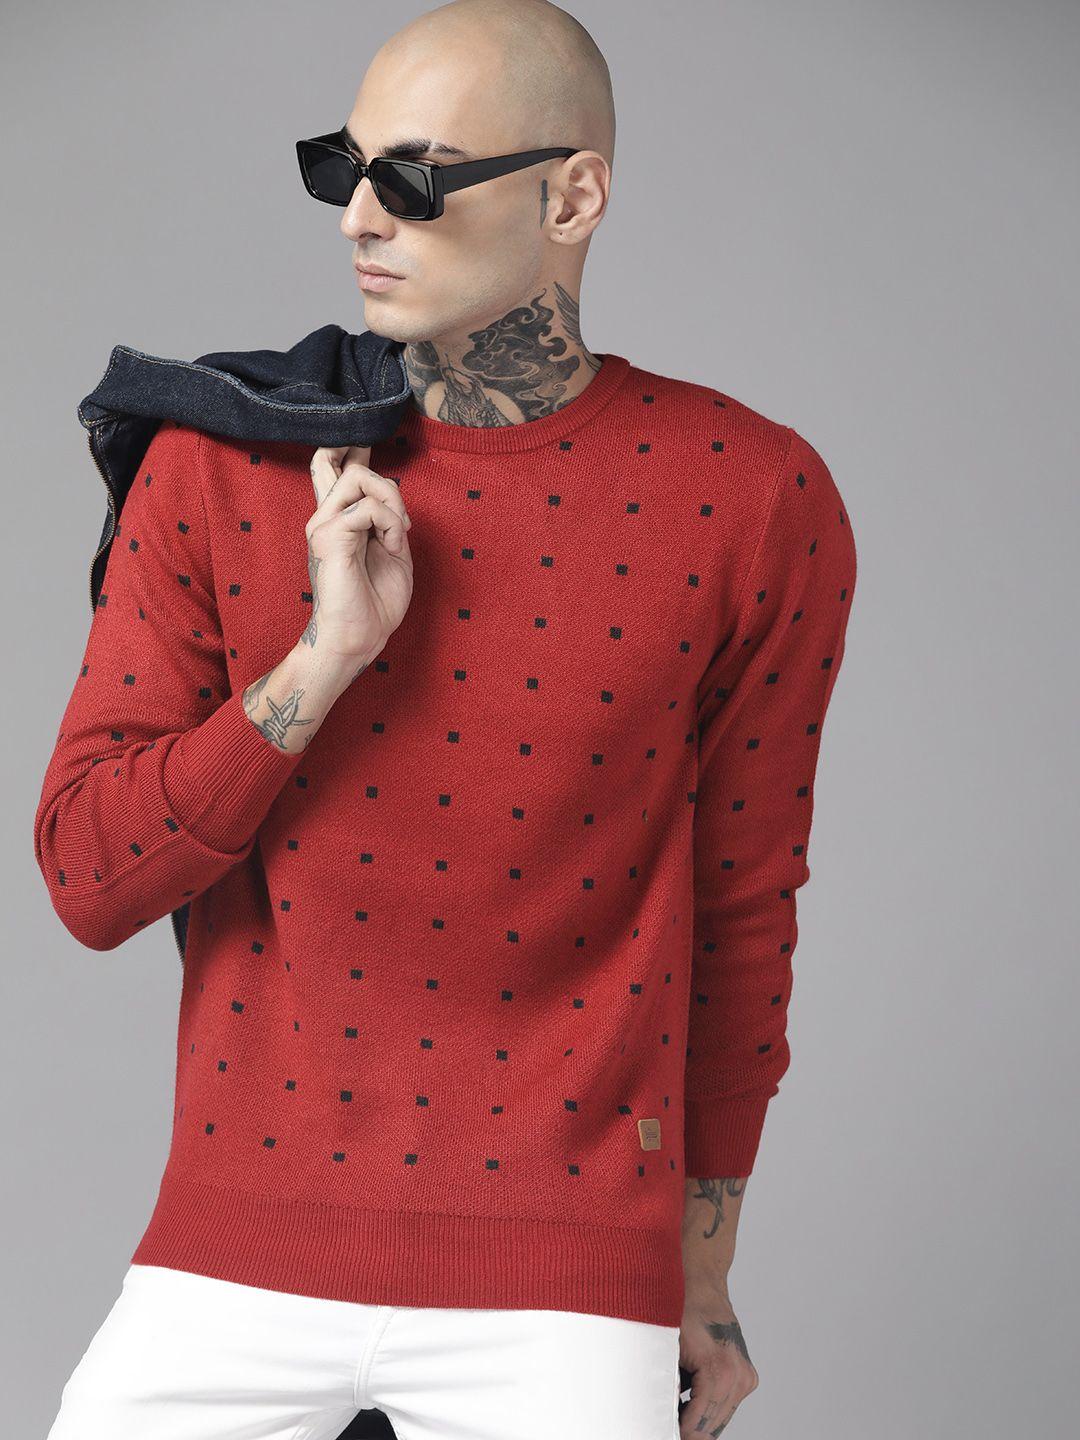 the roadster lifestyle co. men red & black geometric pattern acrylic pullover